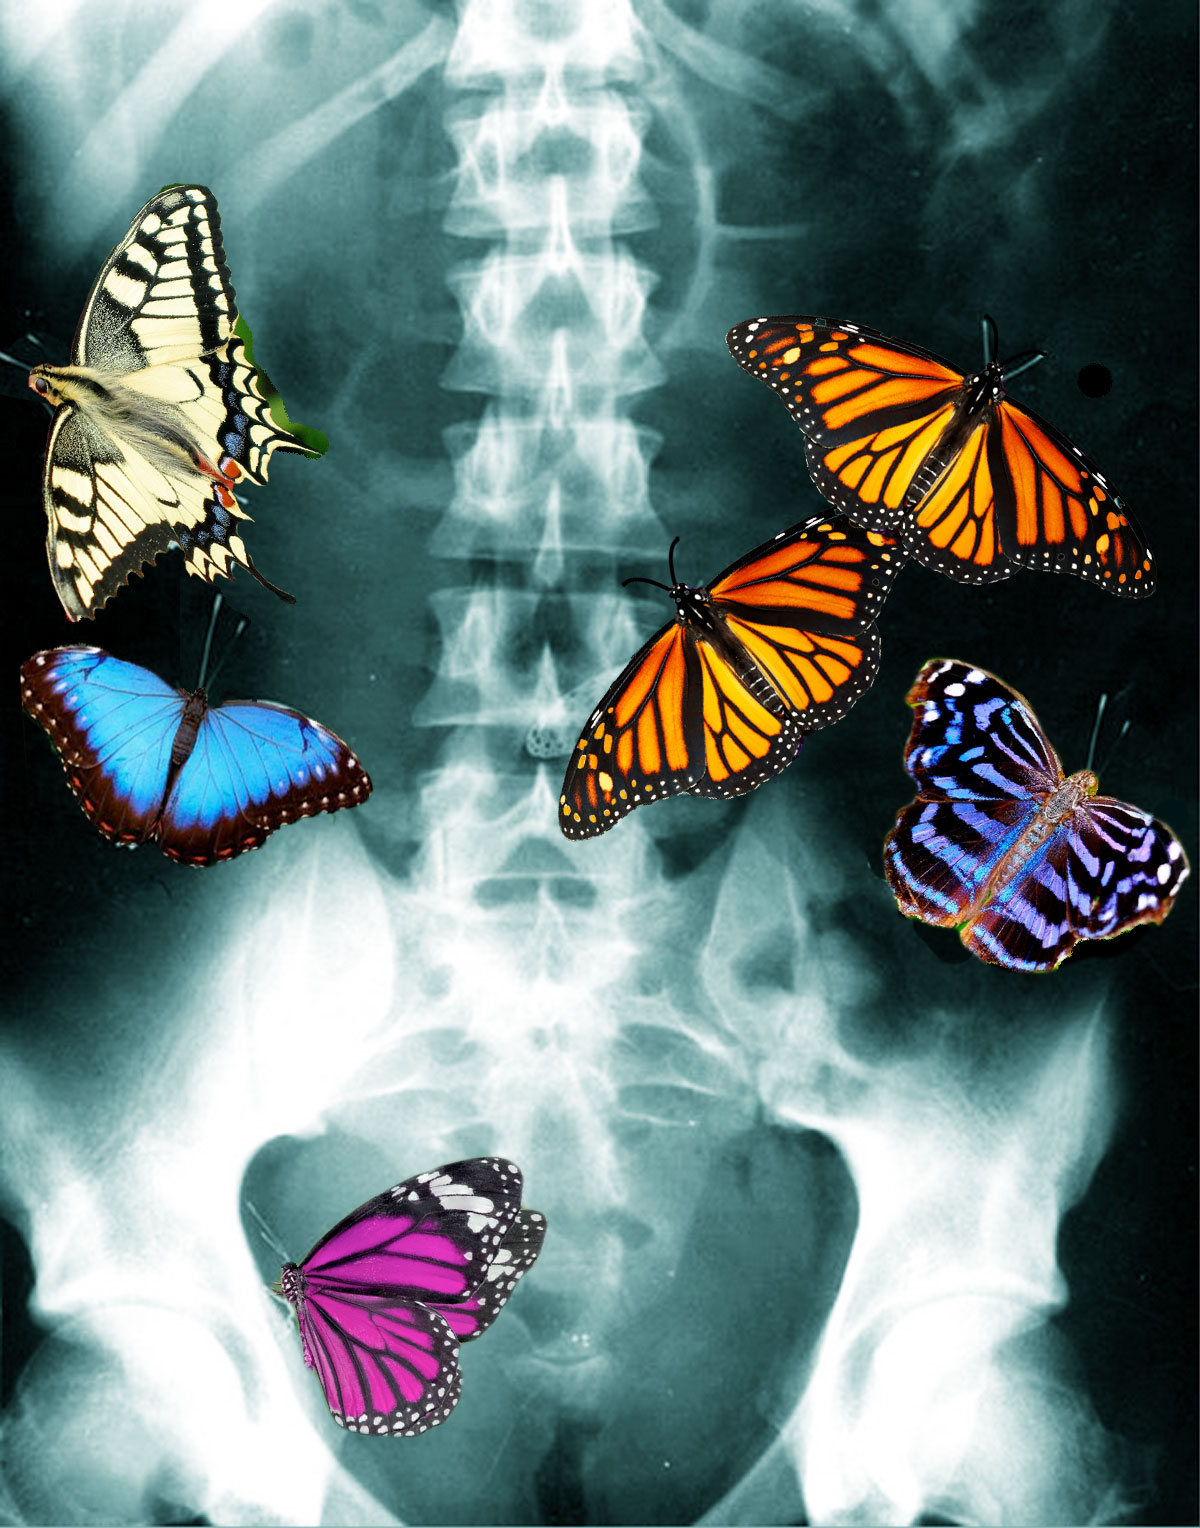 What Causes “Butterflies in the Stomach”?